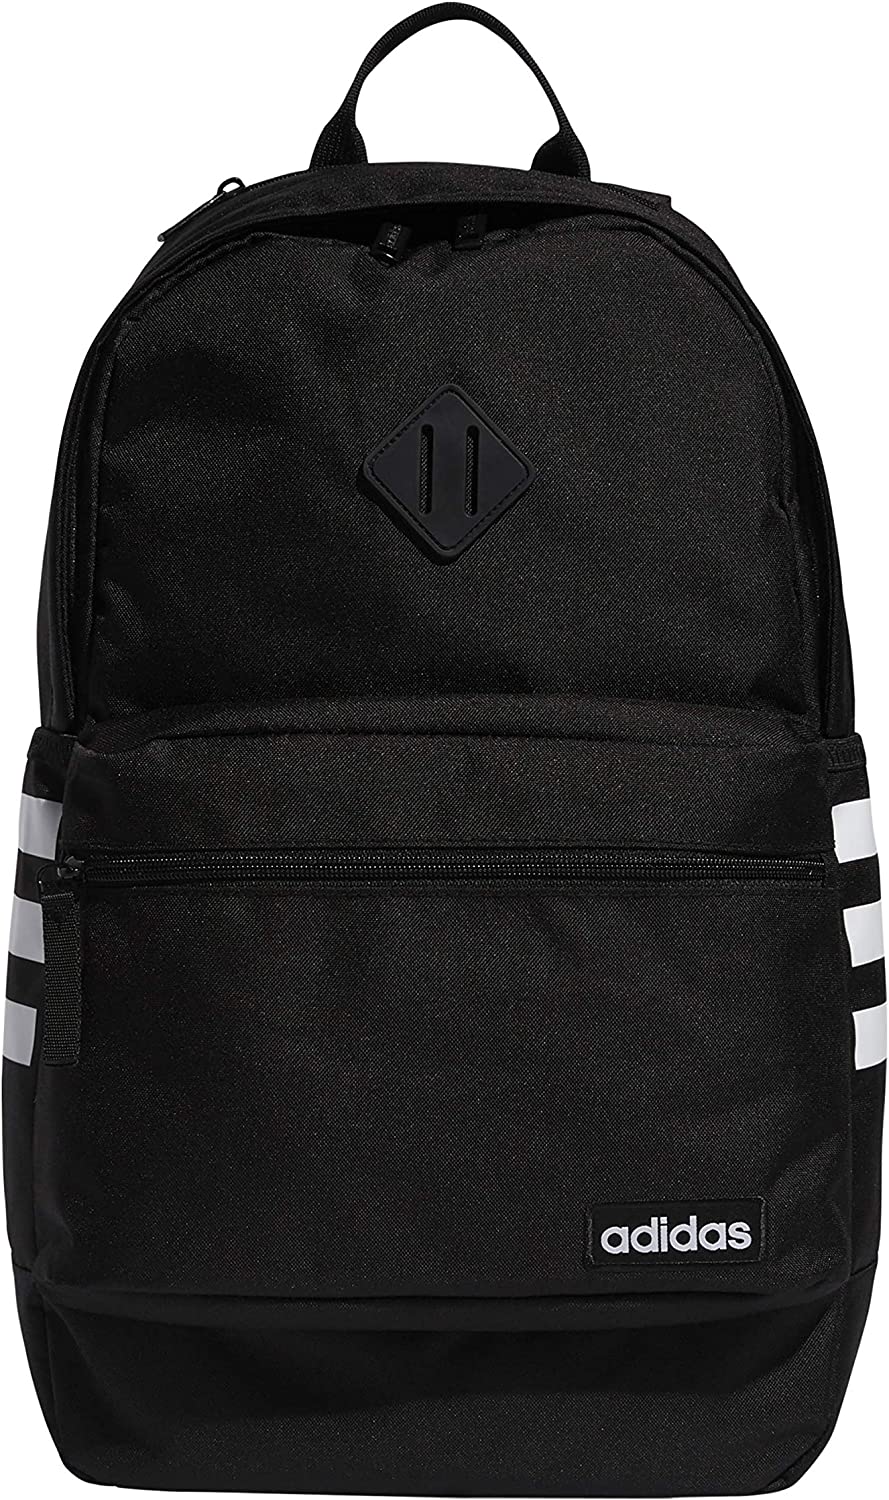 Plausible Contaminado partícula adidas Classic 3-Stripes Zippered Backpack For School